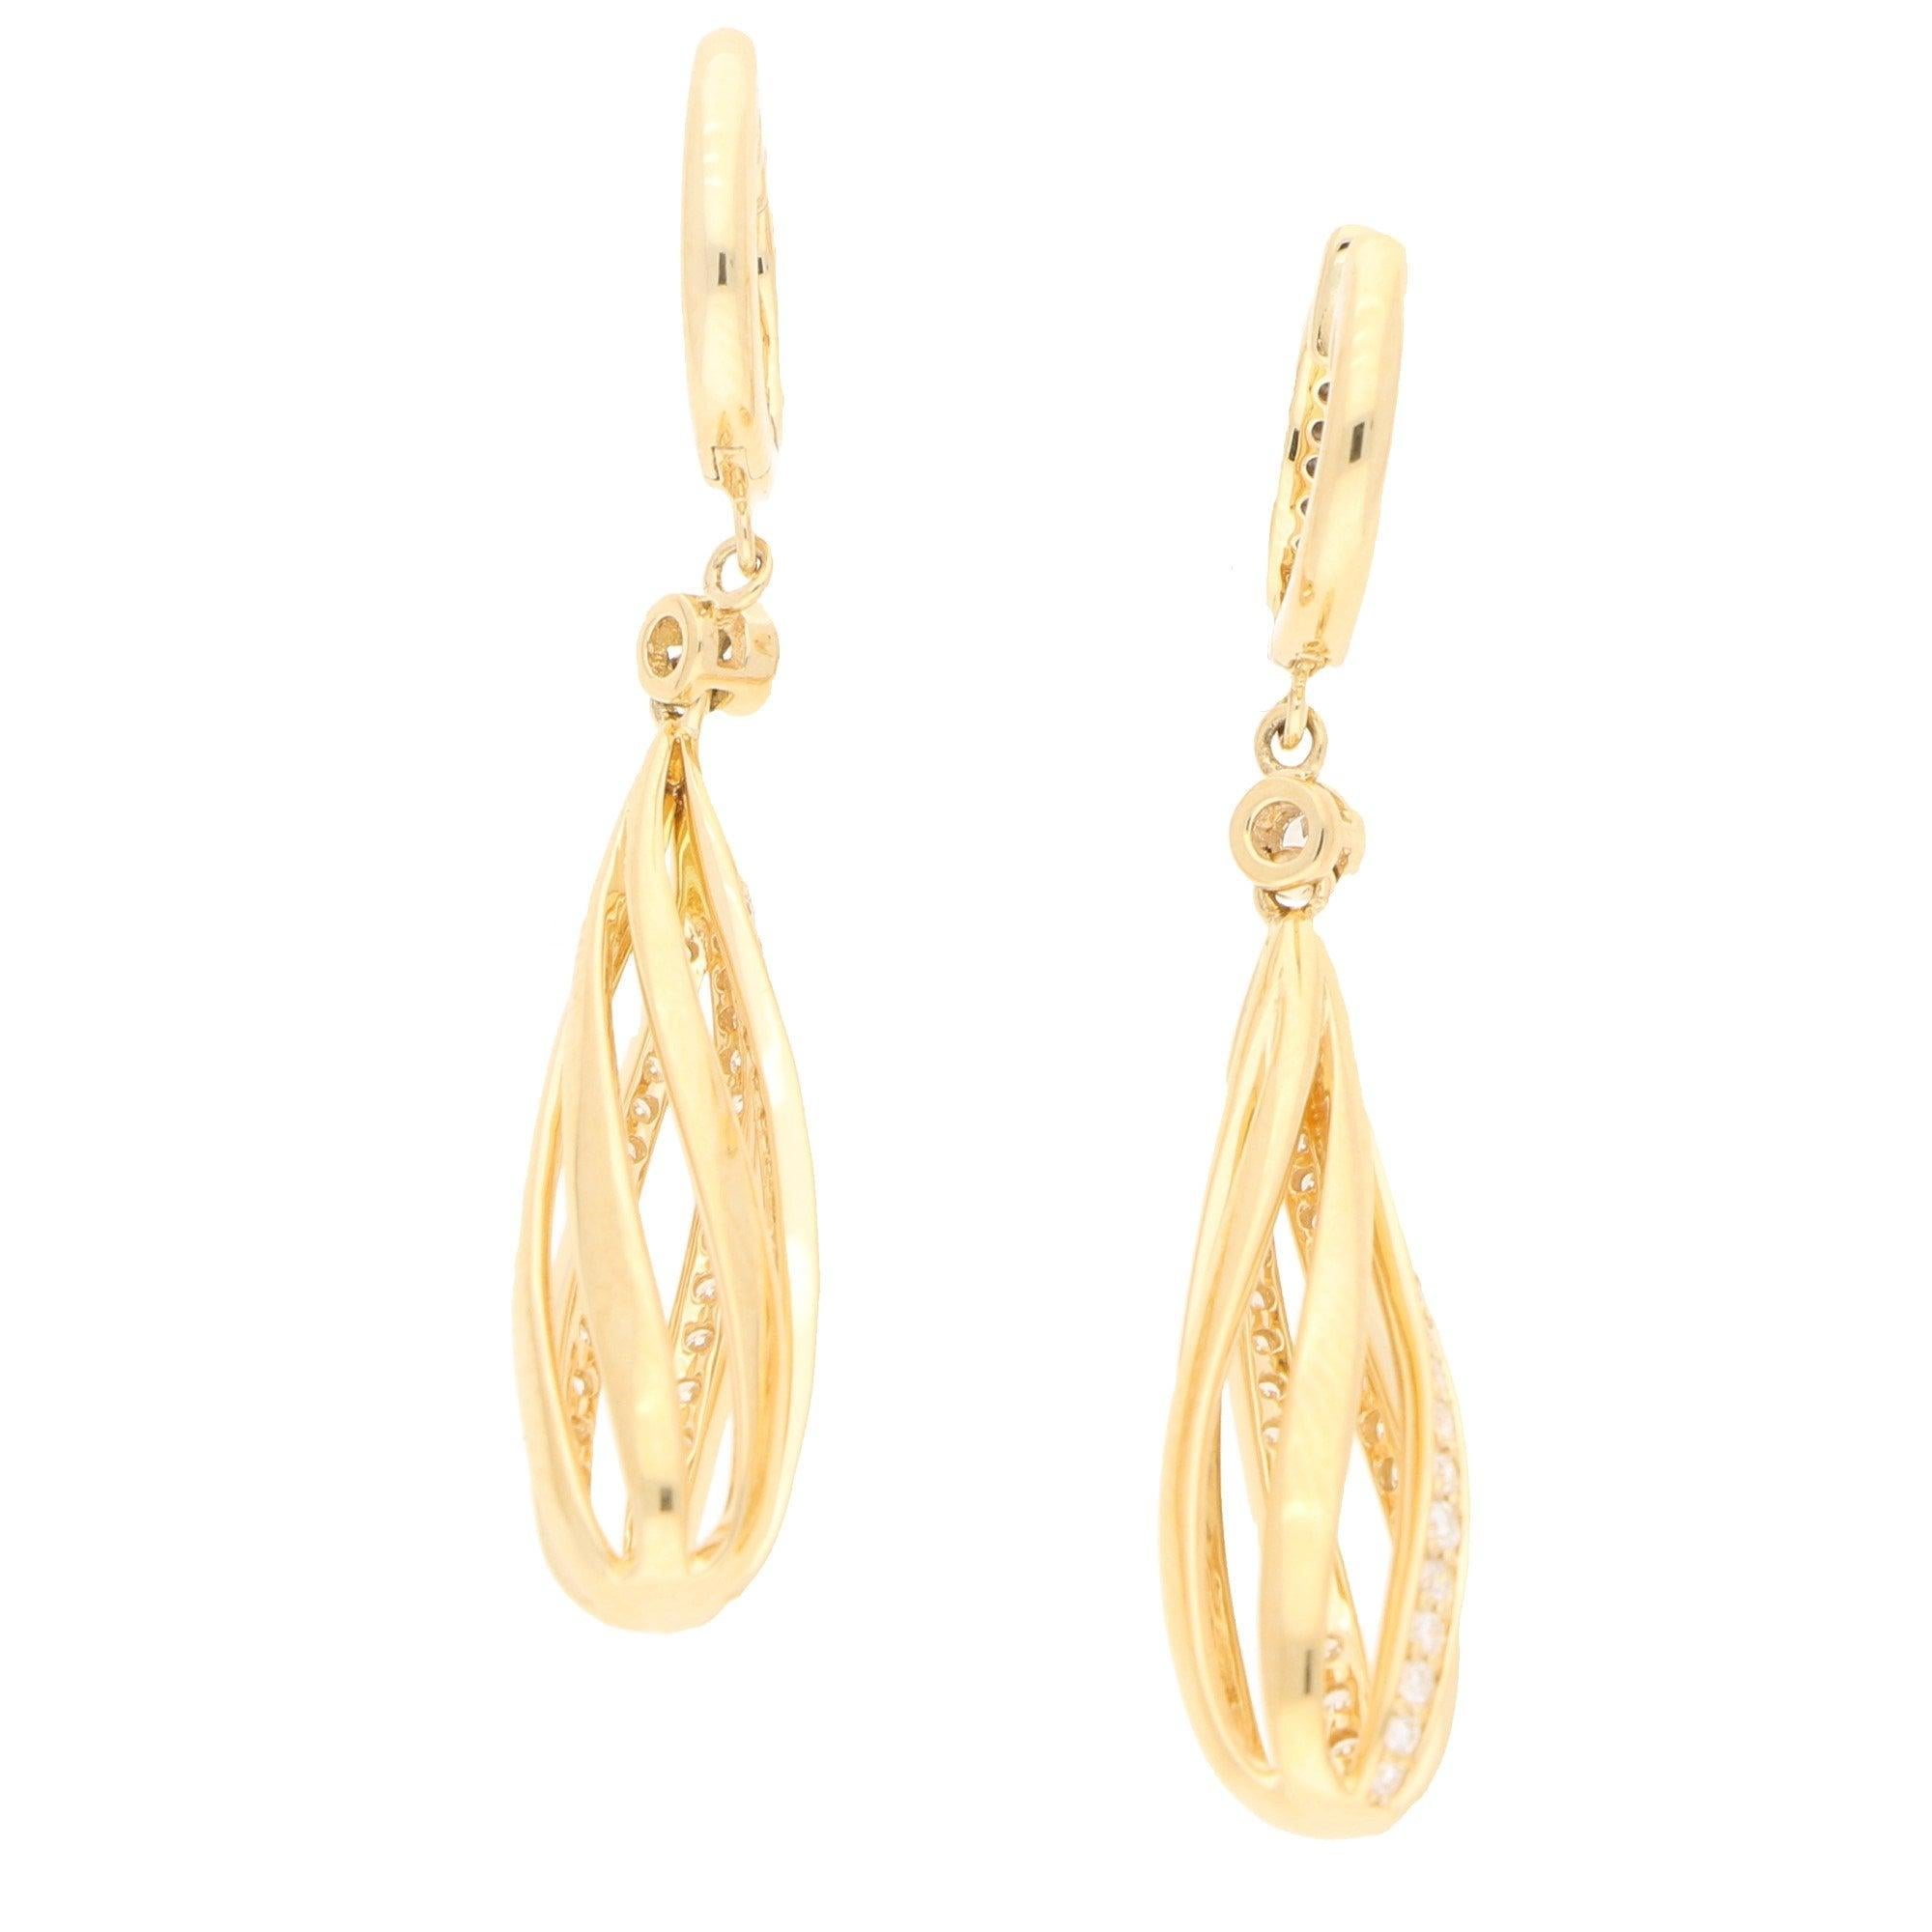 Diamonds approximately 0.60 carats in total, G/H colour, VS clarity.
A pair of diamond spiral earrings in 18-karat yellow gold. 
Each earring is composed of a pear-shaped openwork spiral drop with three of the six spirals grain-set throughout with